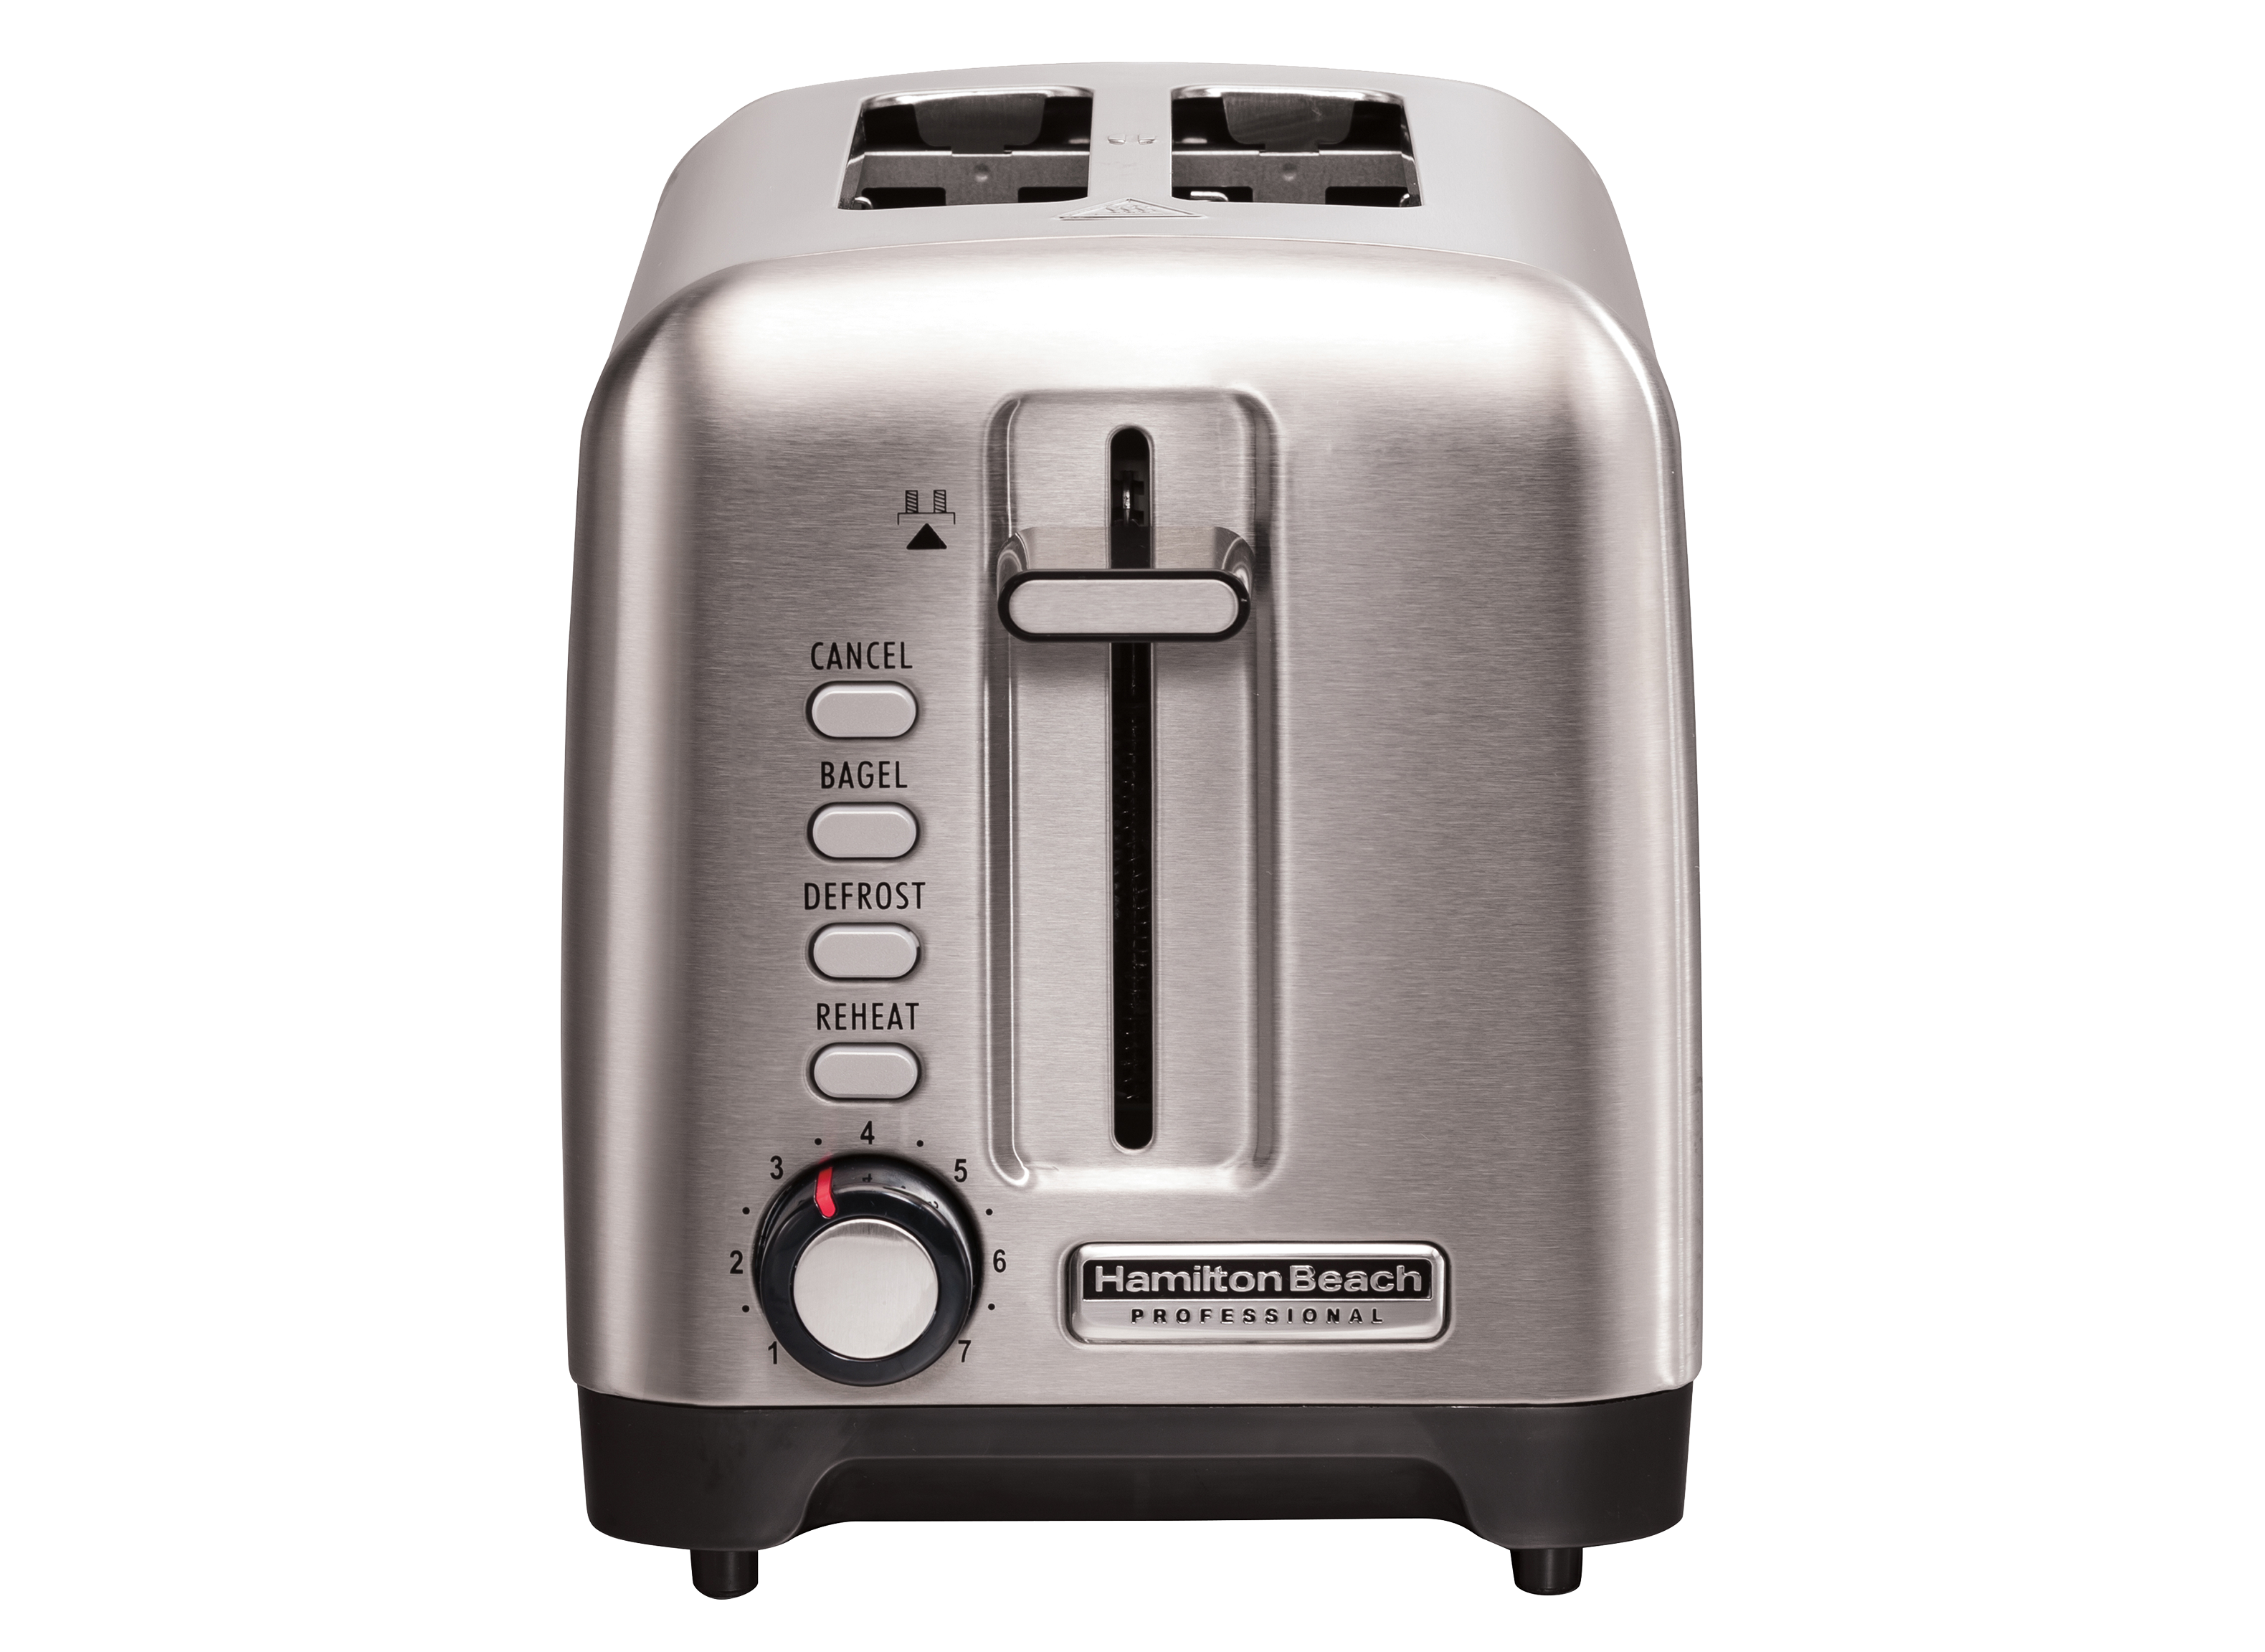 https://crdms.images.consumerreports.org/prod/products/cr/models/399805-2-slice-toasters-hamilton-beach-professional-22990-10008737.png